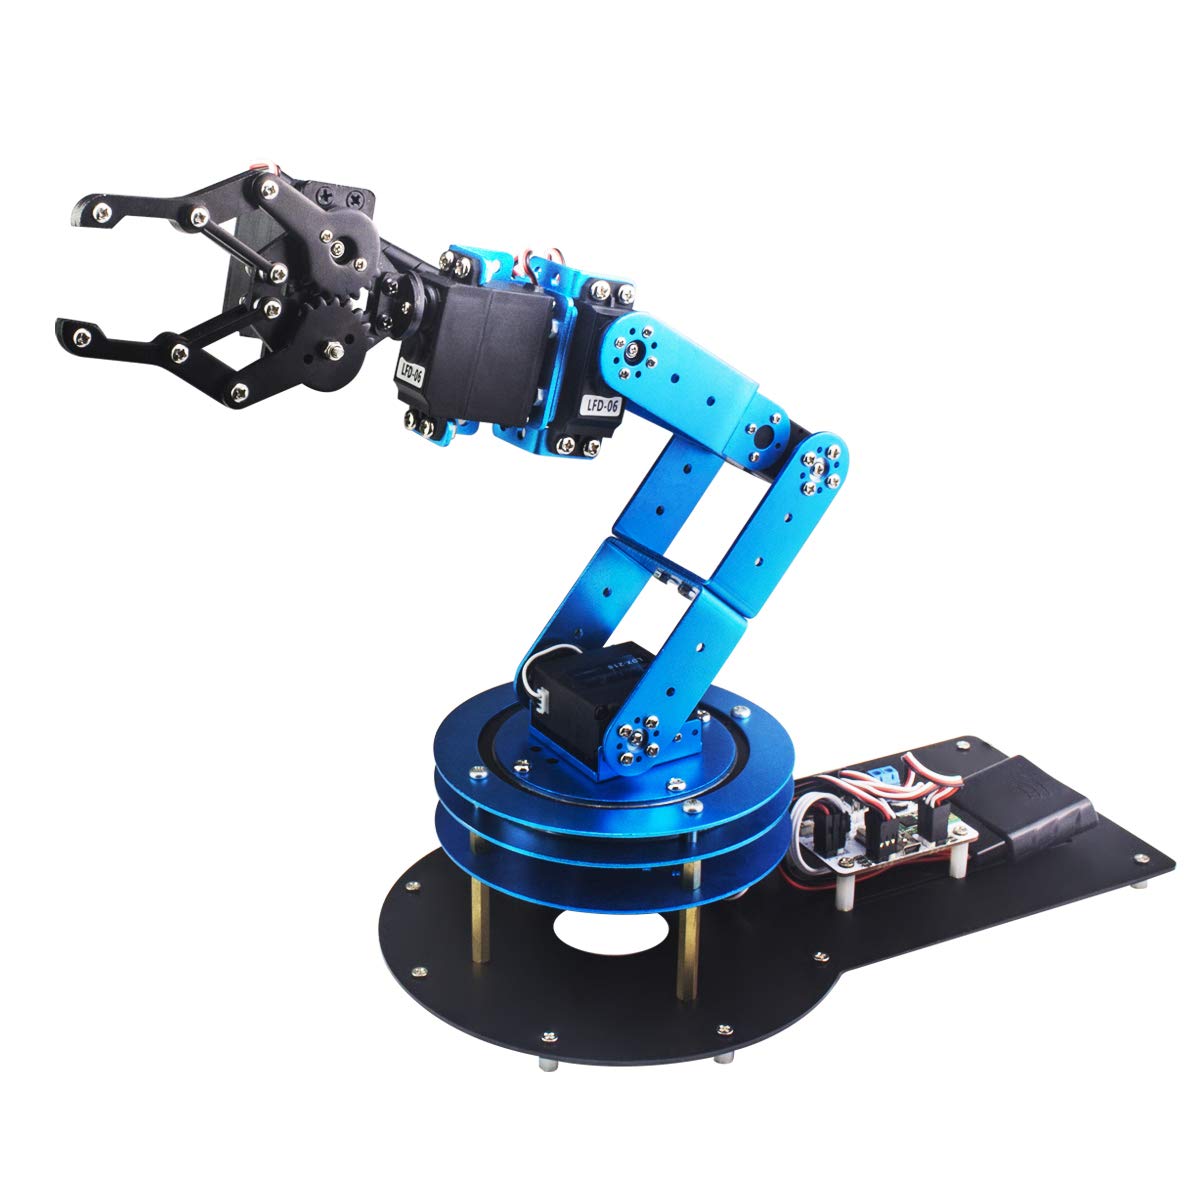 LewanSoul LeArm 6DOF Full Metal Robotic Arm with Servo Controller Wireless Handle Free PC Software and APP Video Tutorial